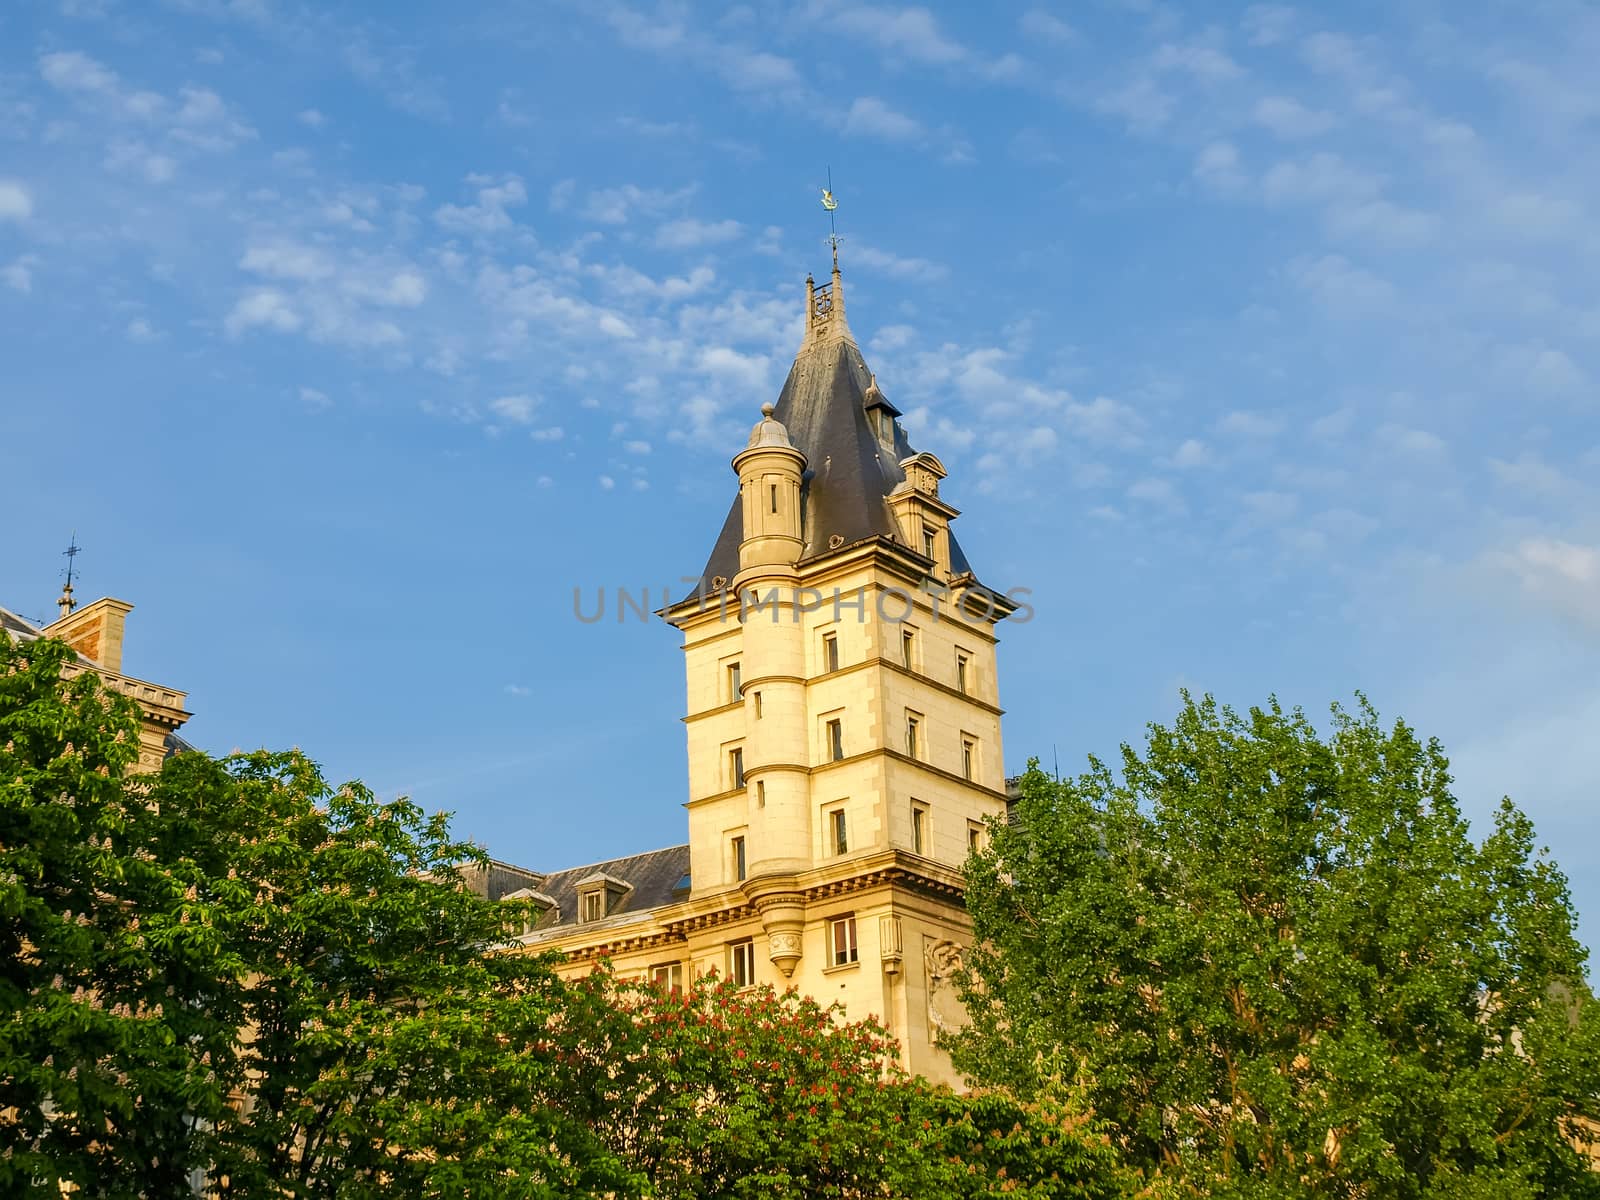 One of the towers of the southern facade of the Palace of Justice among flowering chestnuts in Paris
